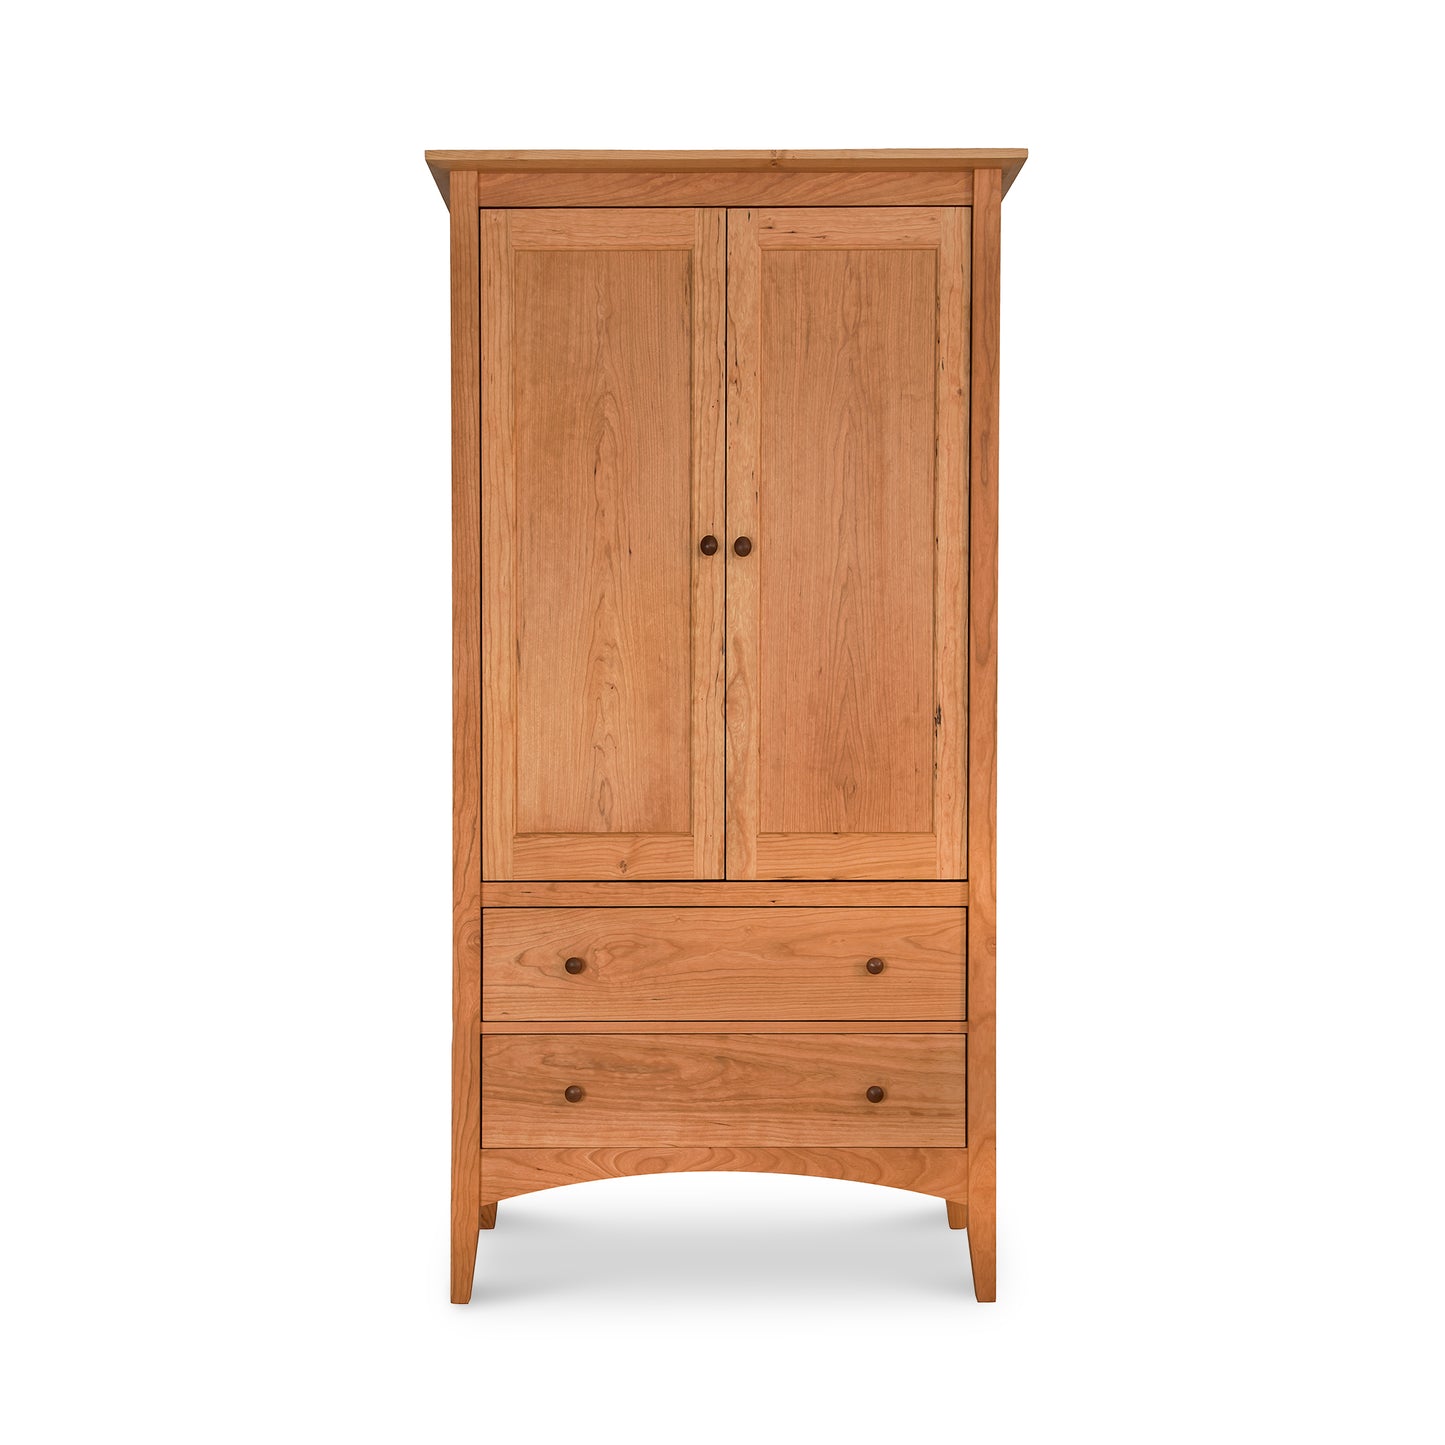 American Shaker Armoire from Maple Corner Woodworks with two doors and a lower section featuring two drawers, isolated on a white background.